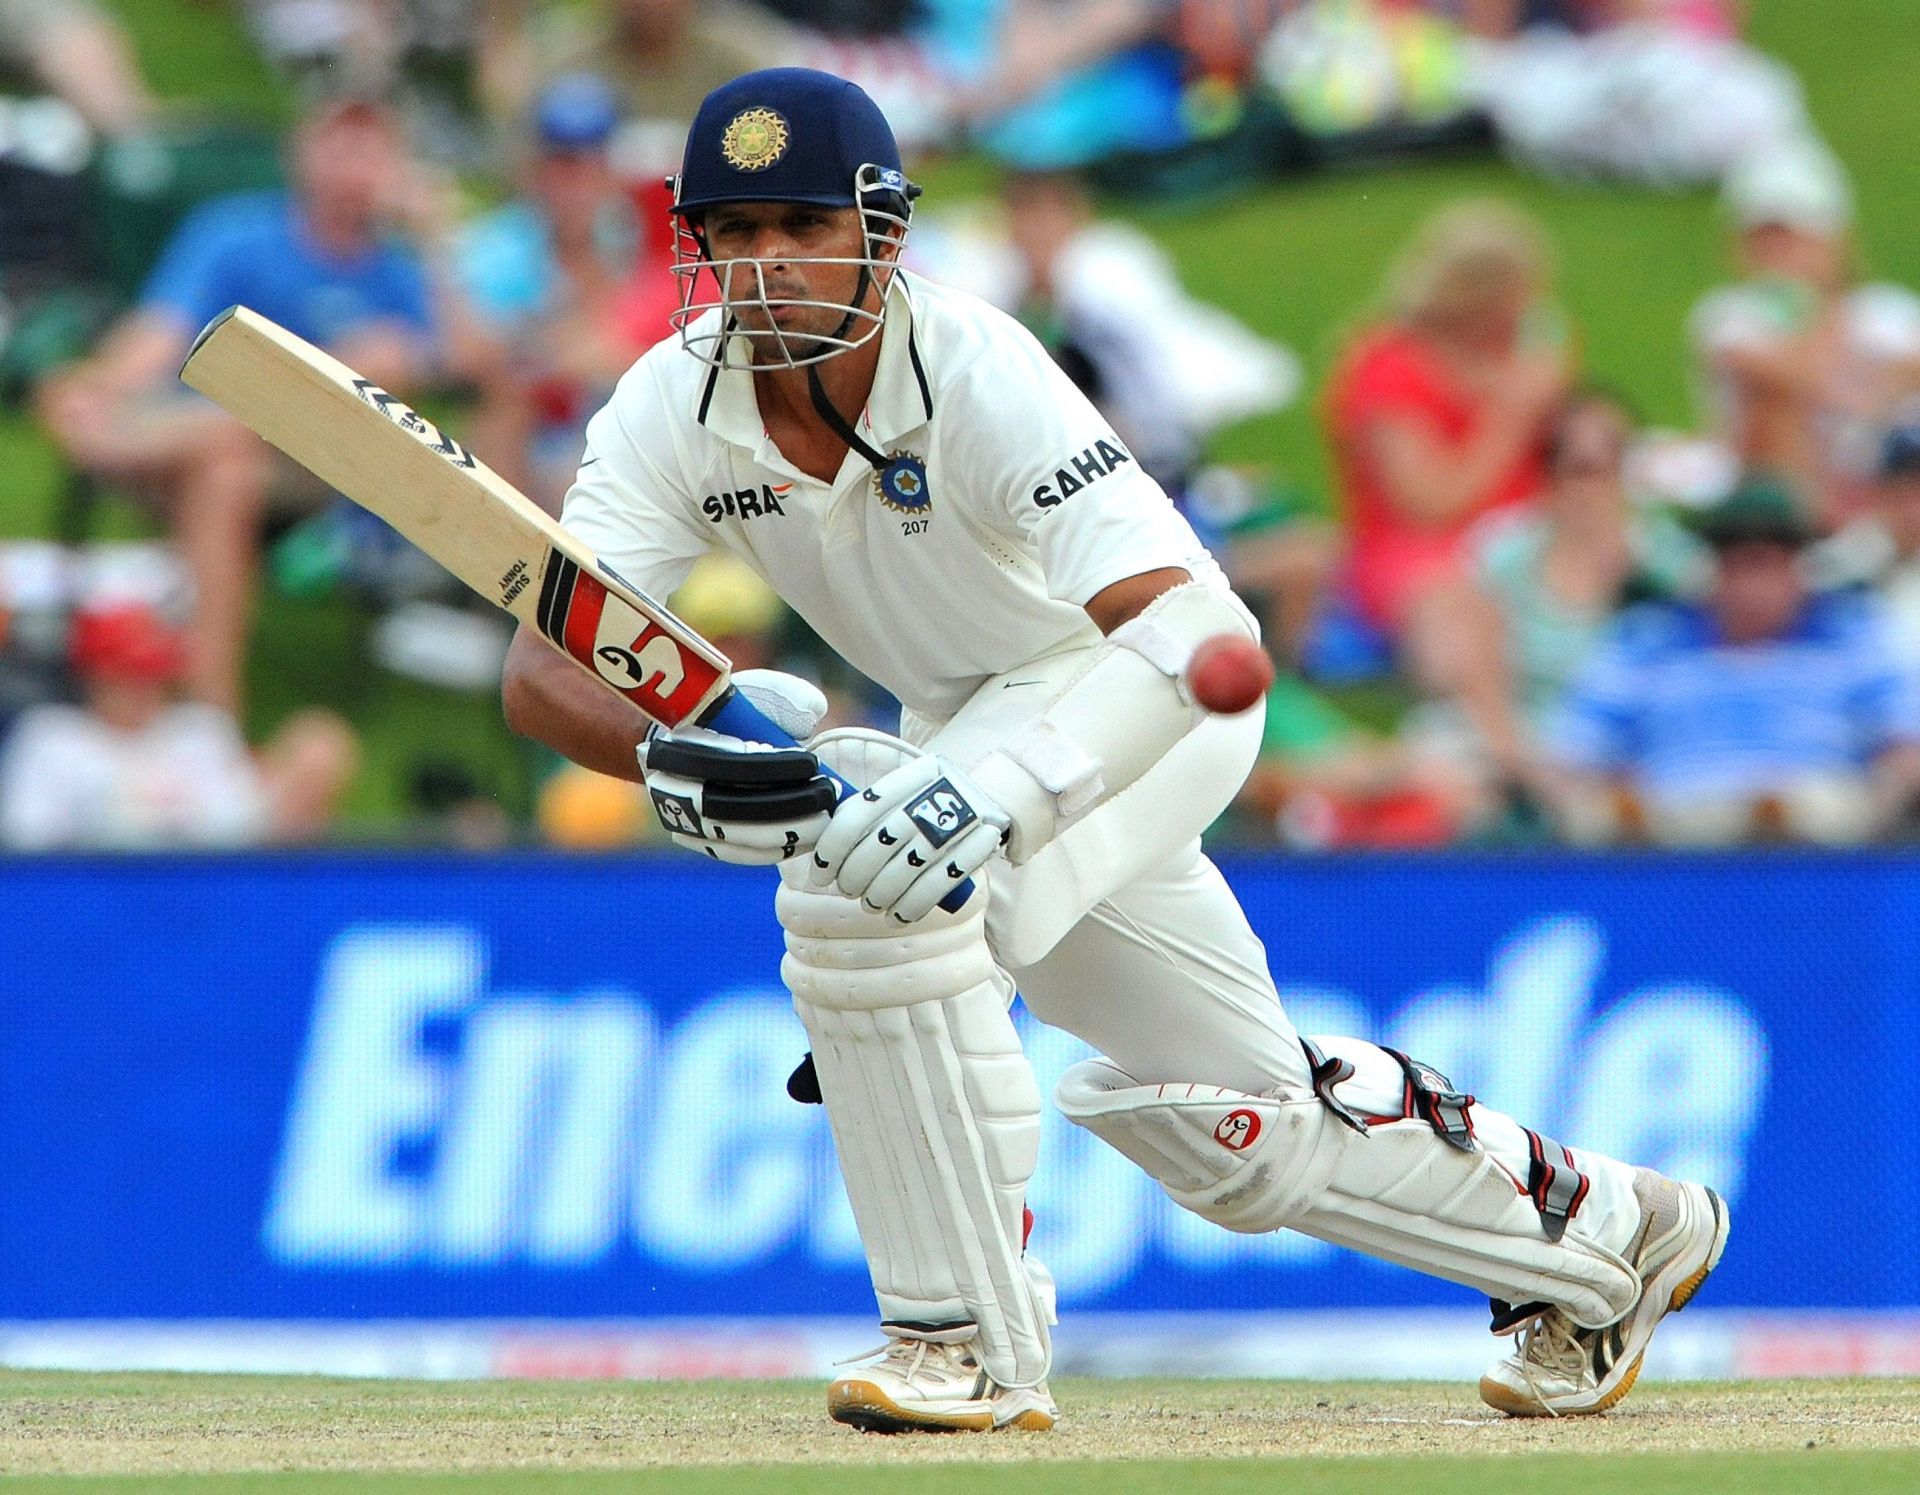 Rahul Dravid scored his first international ton in Johannesburg. (Pic: Getty Images)